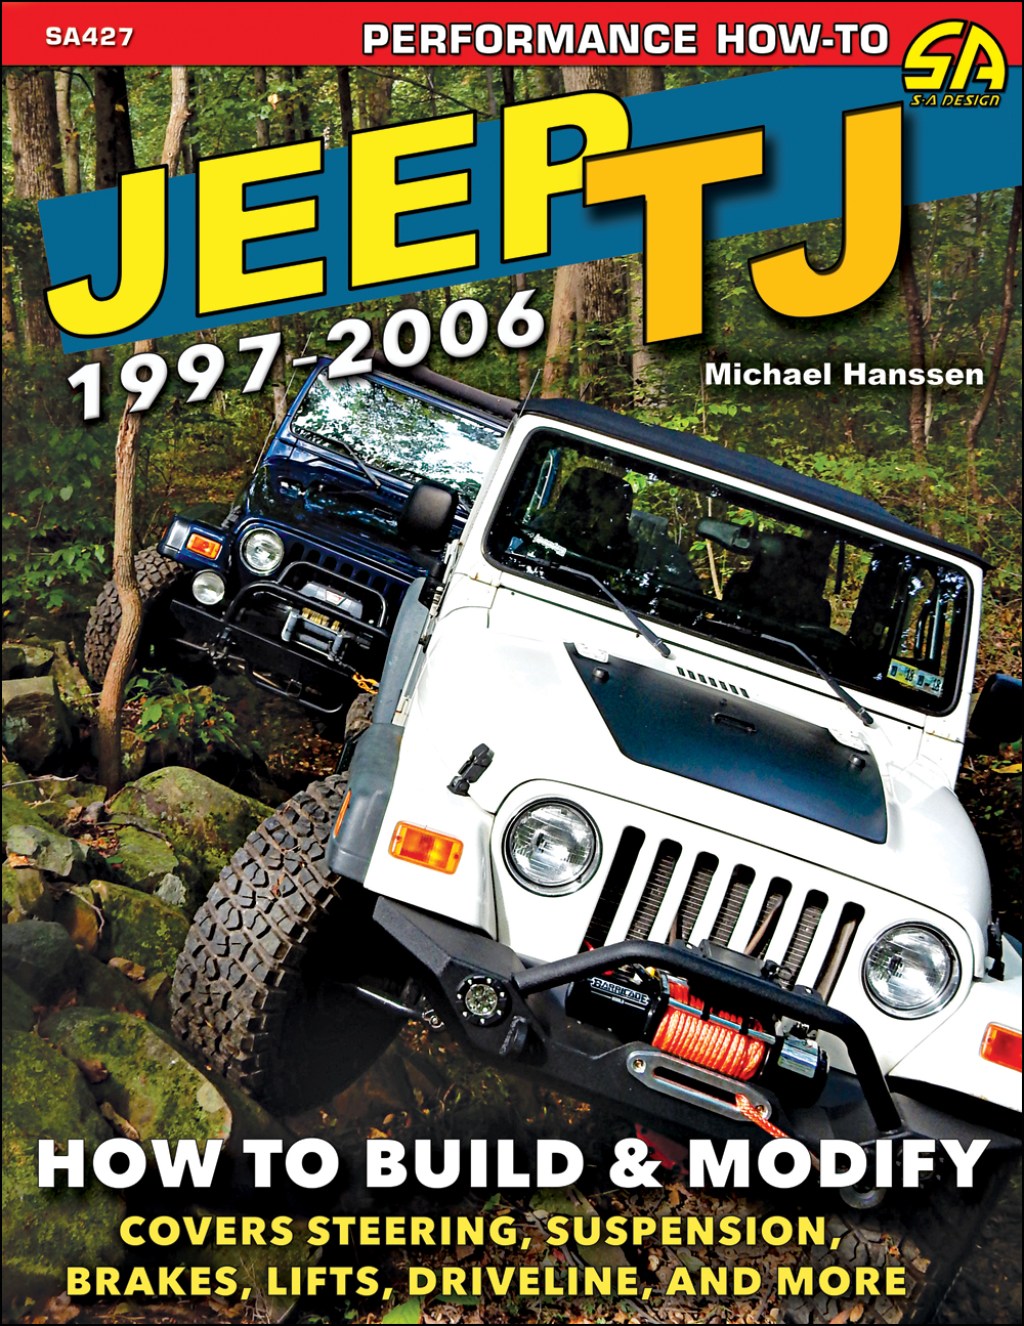 Picture of: Jeep Wrangler Original Owner’s Manual includes SE & Sahara